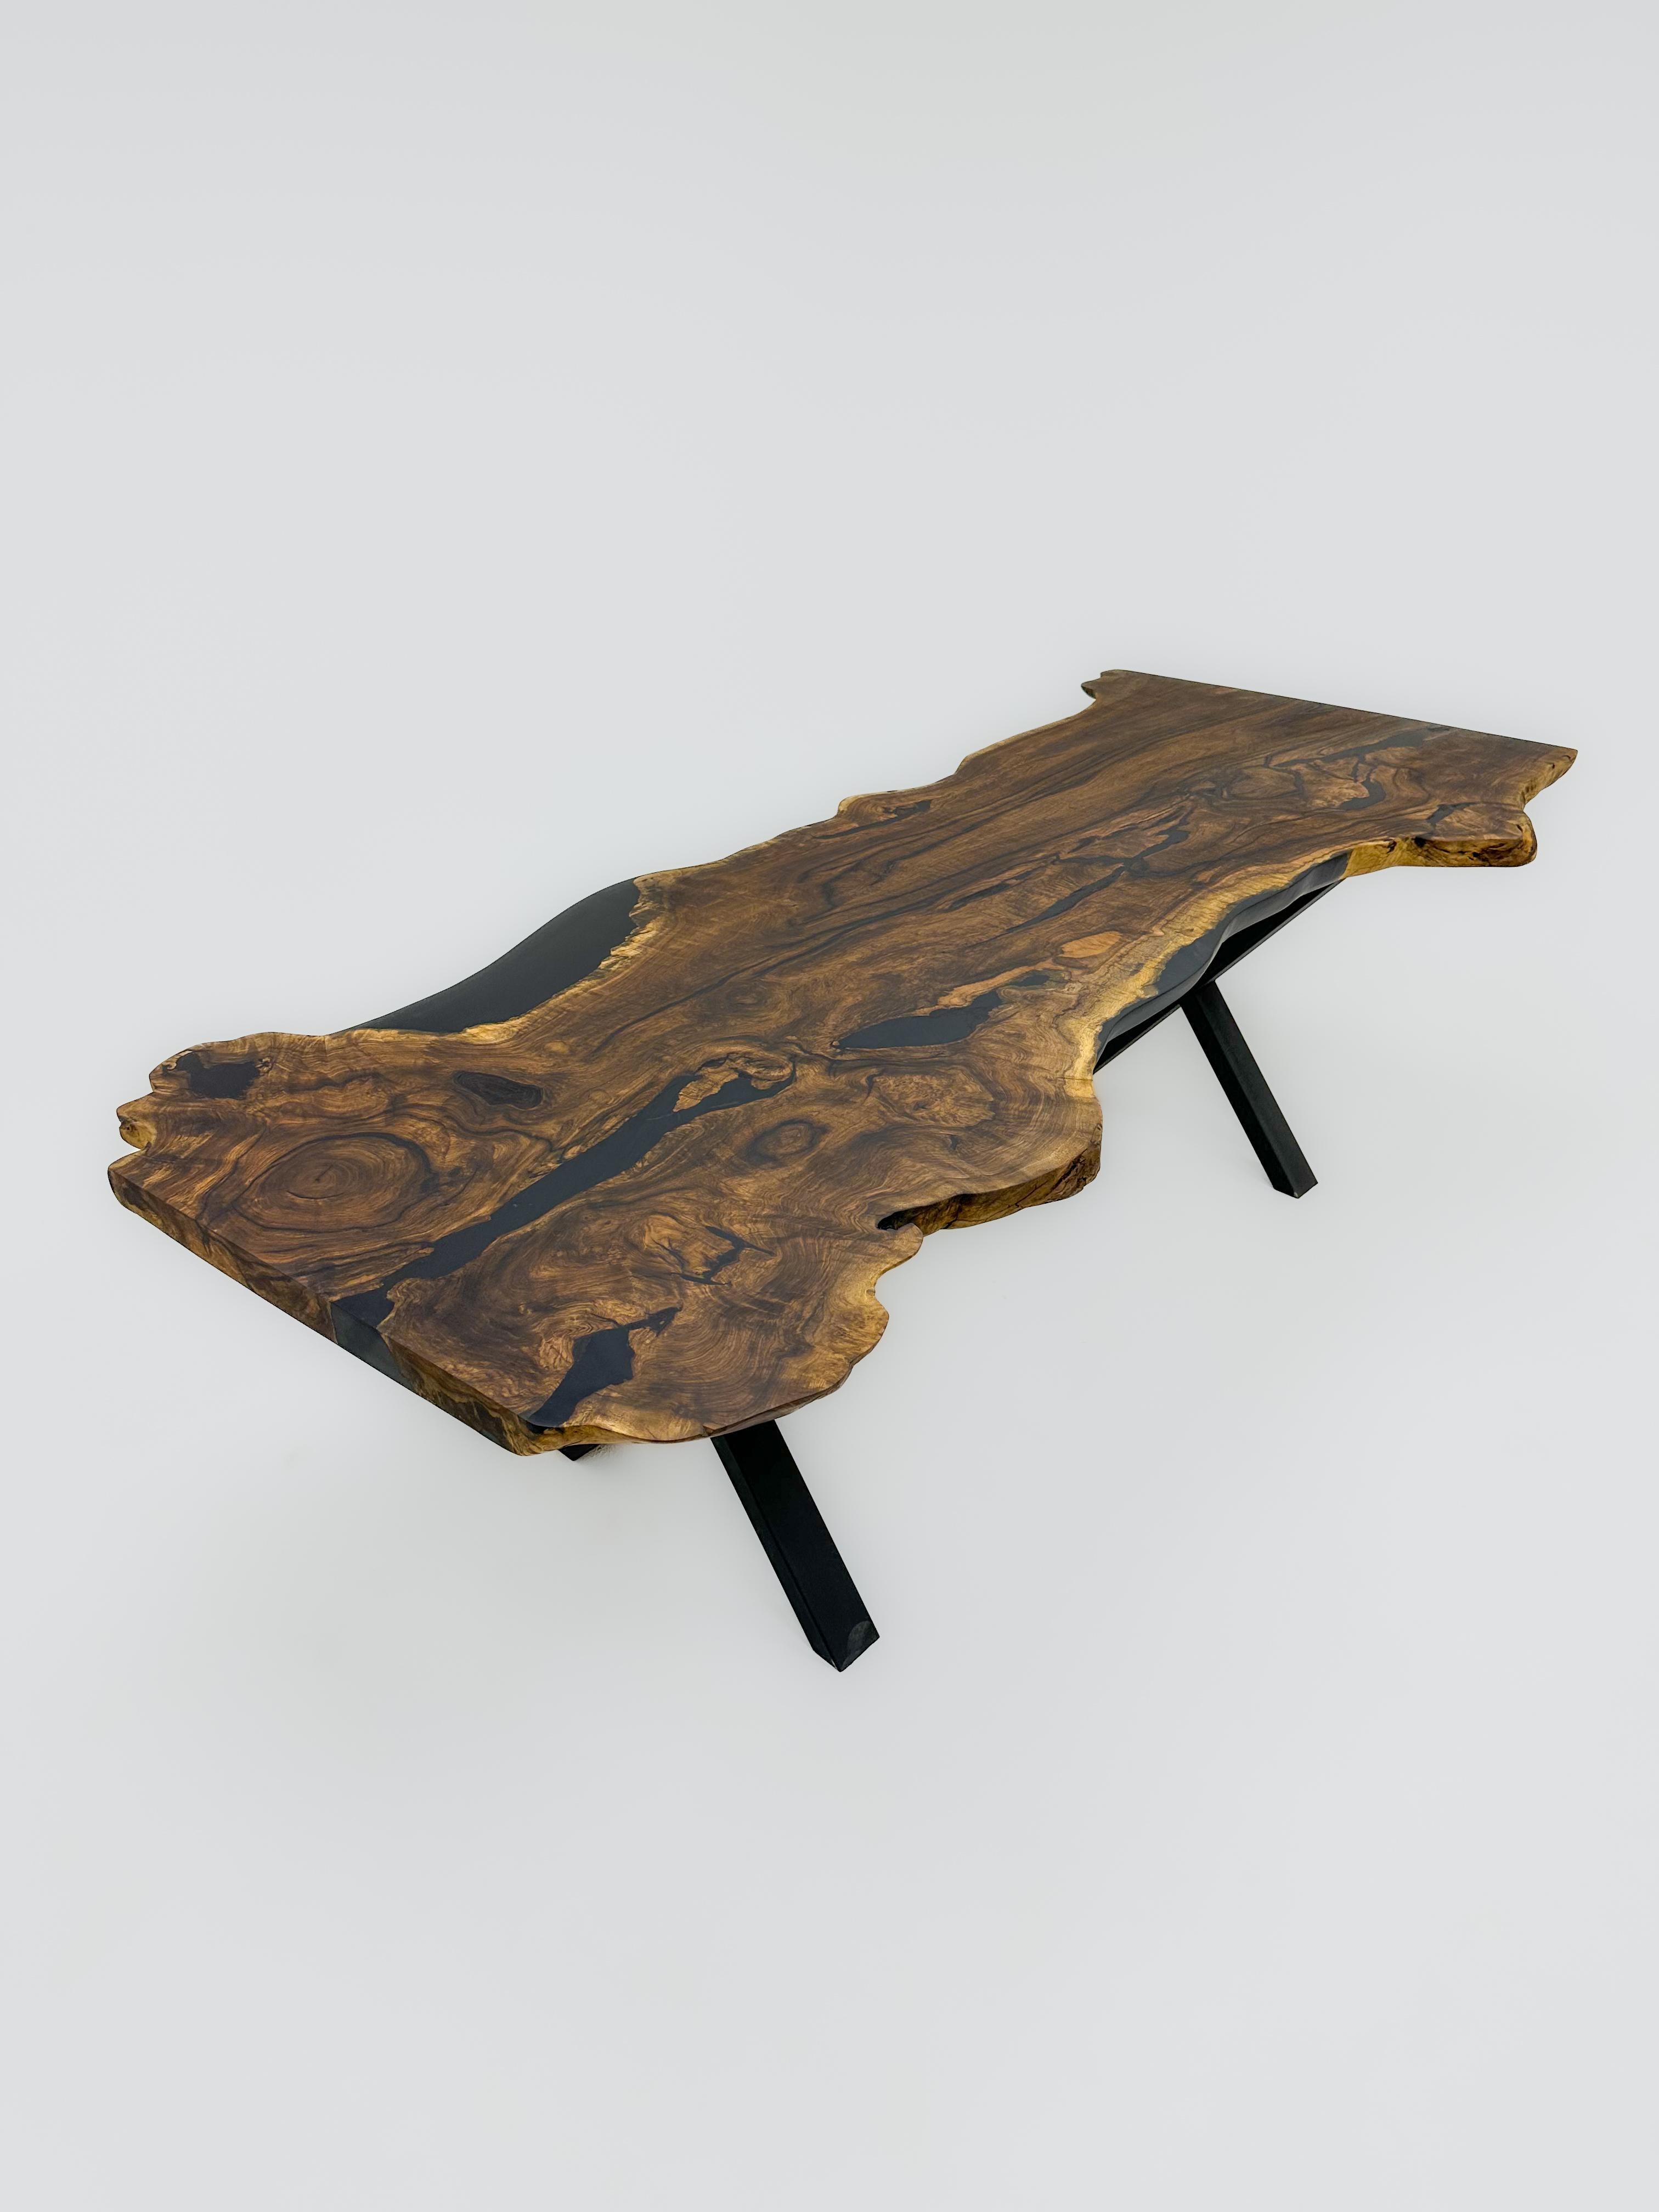 Massive One Piece Slab Live Edge Walnut Wood Dining Table For Sale 1